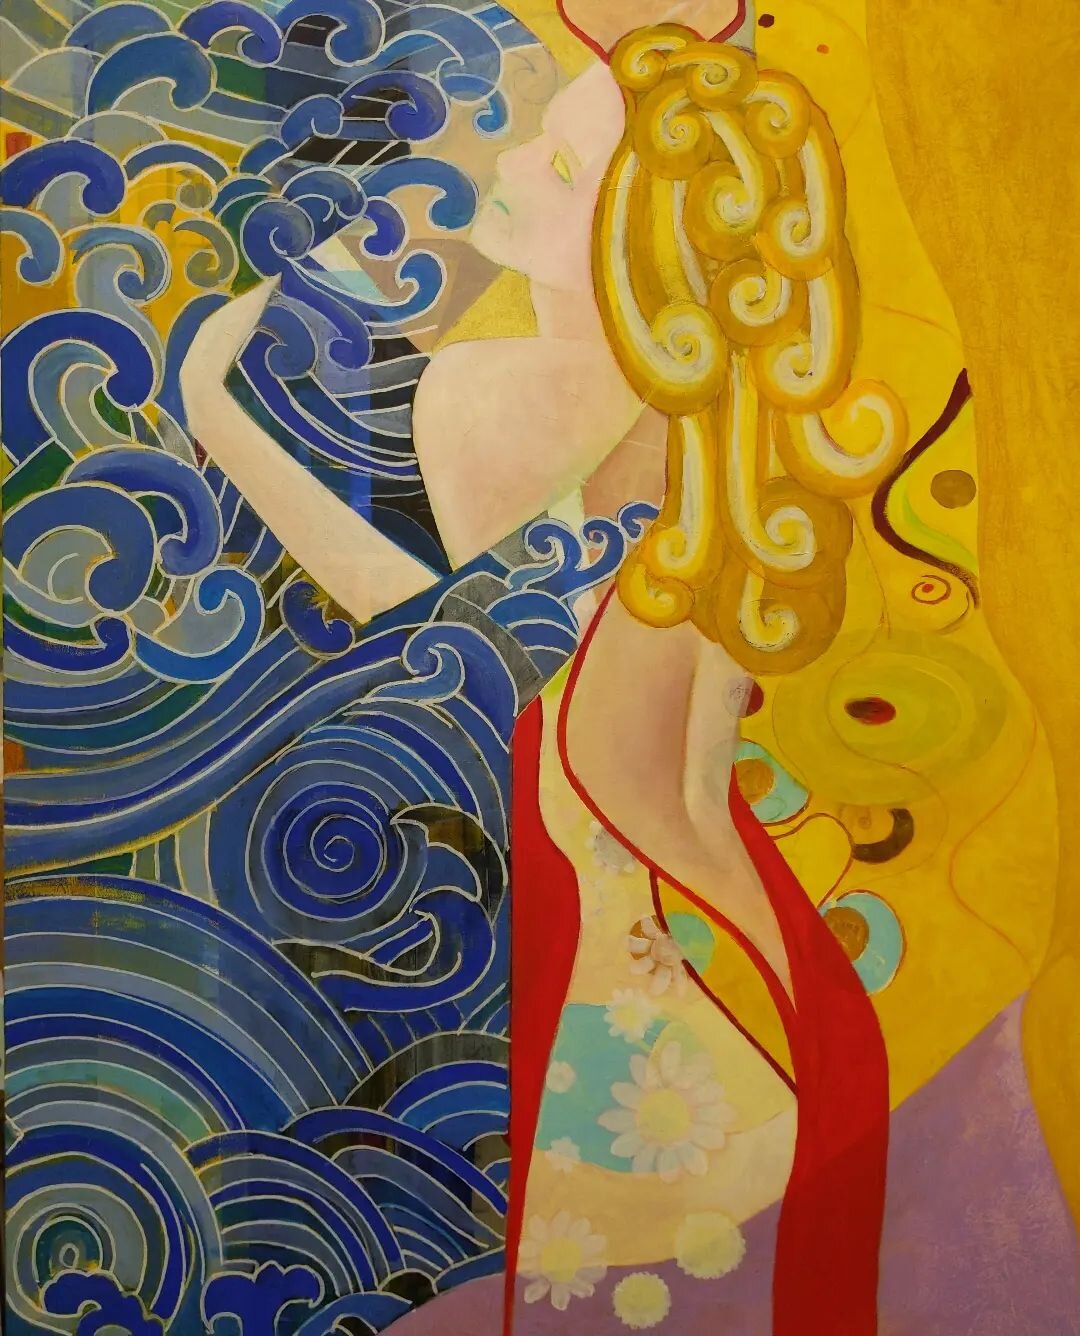 And now for something different! 
Work on progress for a painting I've called Dreams - 100x80cm

#desire
#kiss
#embrace
#sensual
#contemporaryart 
#sensuality
#wipart 
#artcan 
#artcanartist